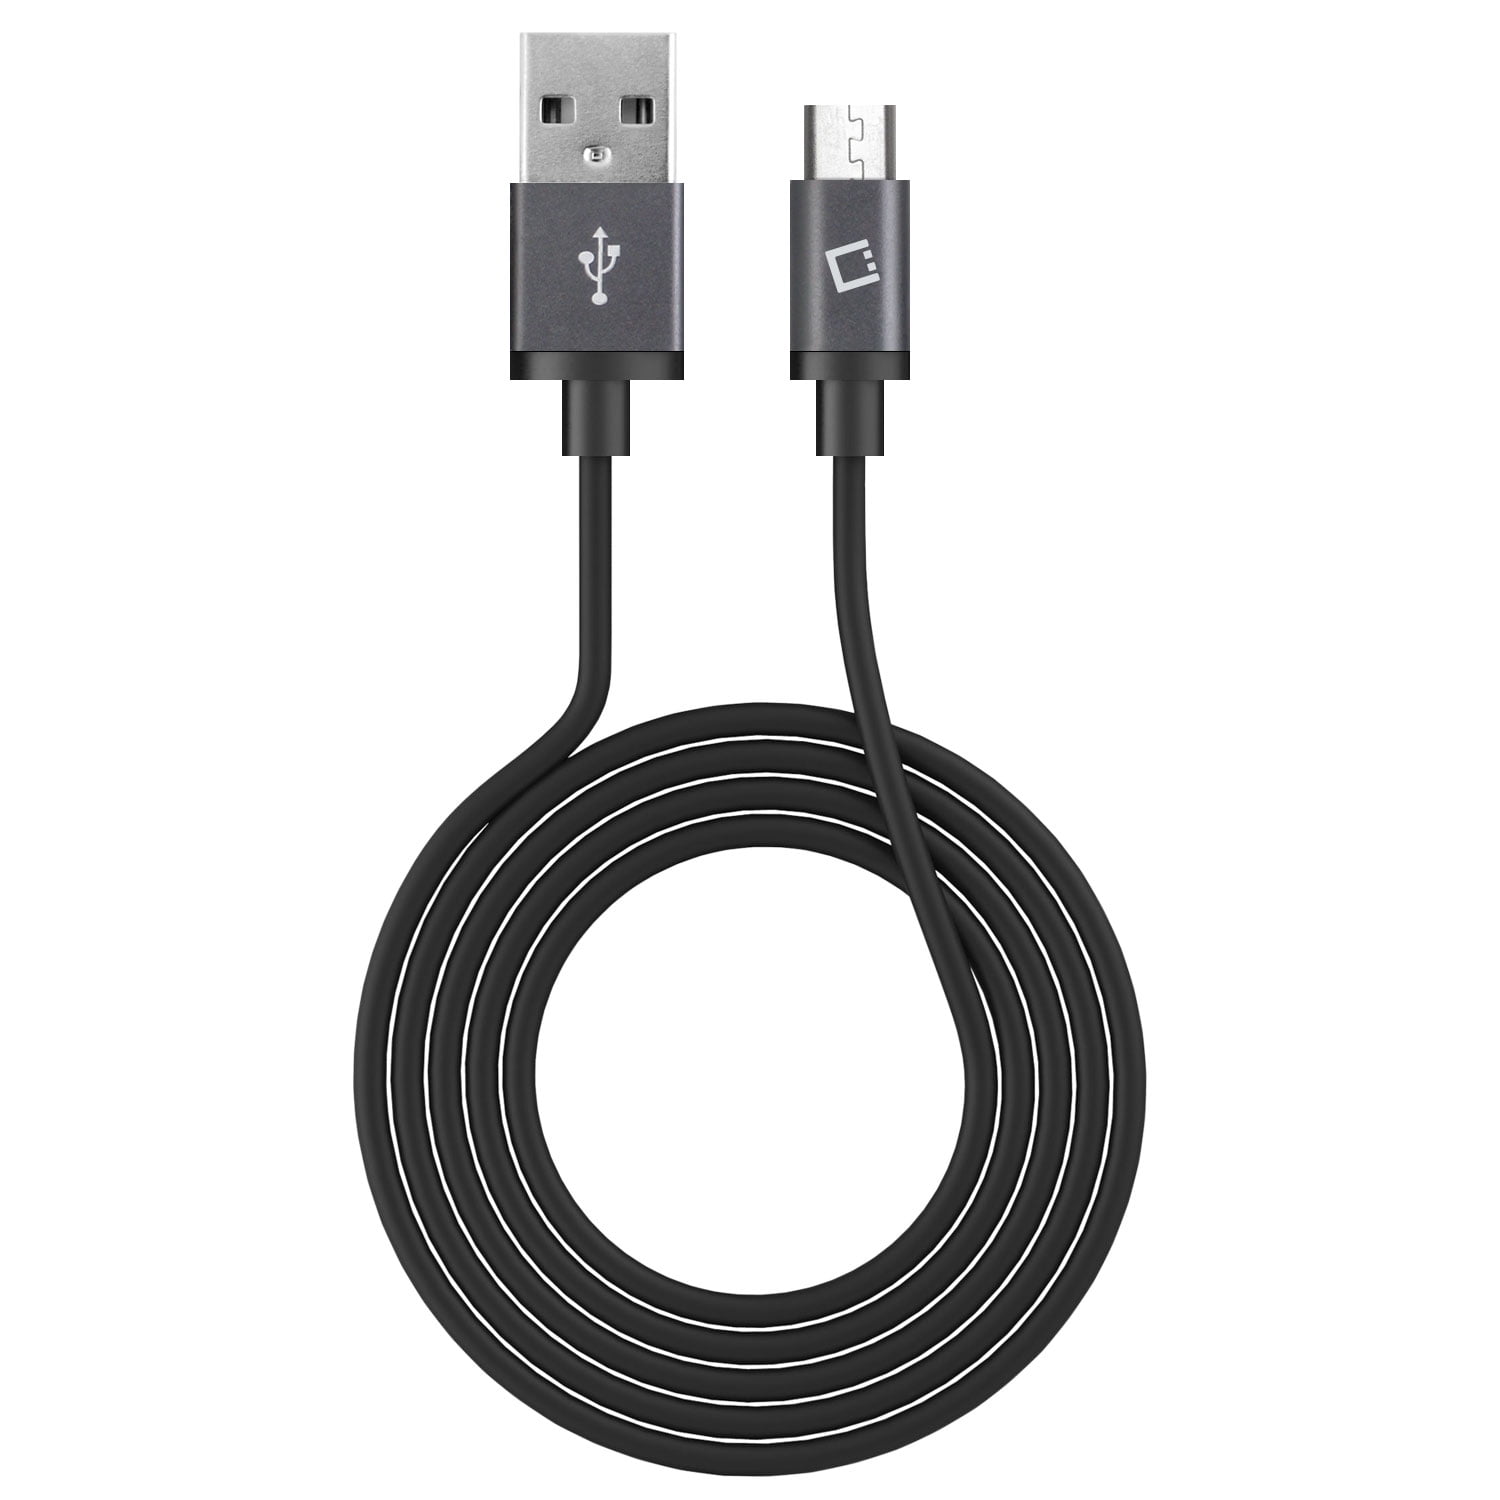 Beautiful Woman Growling Ocelot Head Universal 3 in 1 Multi-Purpose USB Cable Charging Cable Adapter for Mobile Phones and Tablets Micro USB Port Connector